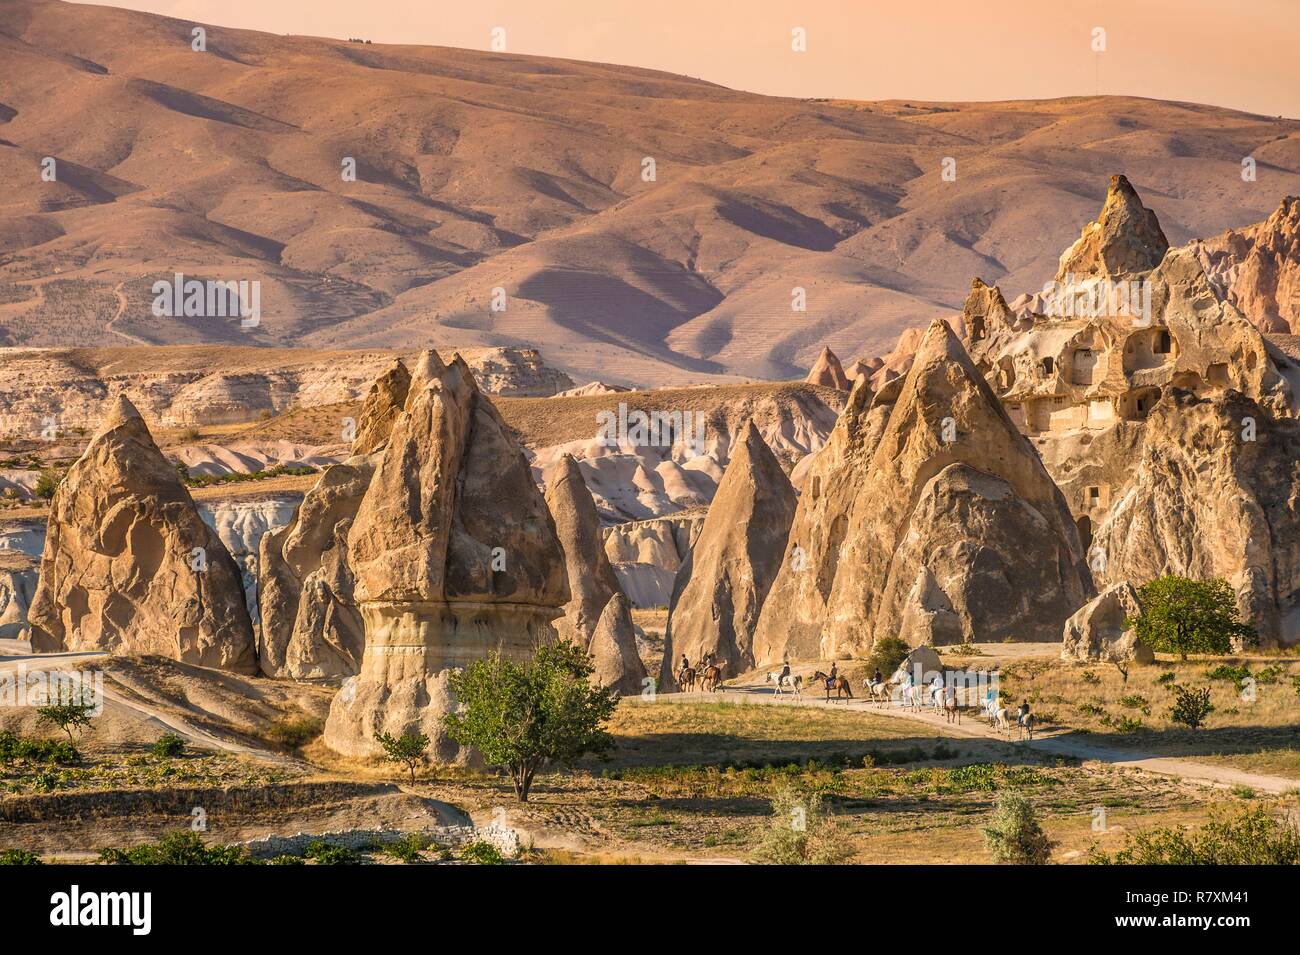 Turkey, Central Anatolia, Nev&#x15f;ehir province, Cappadocia UNESCO World Heritage Site, Kiliçlar, horse riding in the Valley of the Swords, landscape of volcanic tuff hills and vestiges of troglodyte dwellings of the Göreme National Park Stock Photo